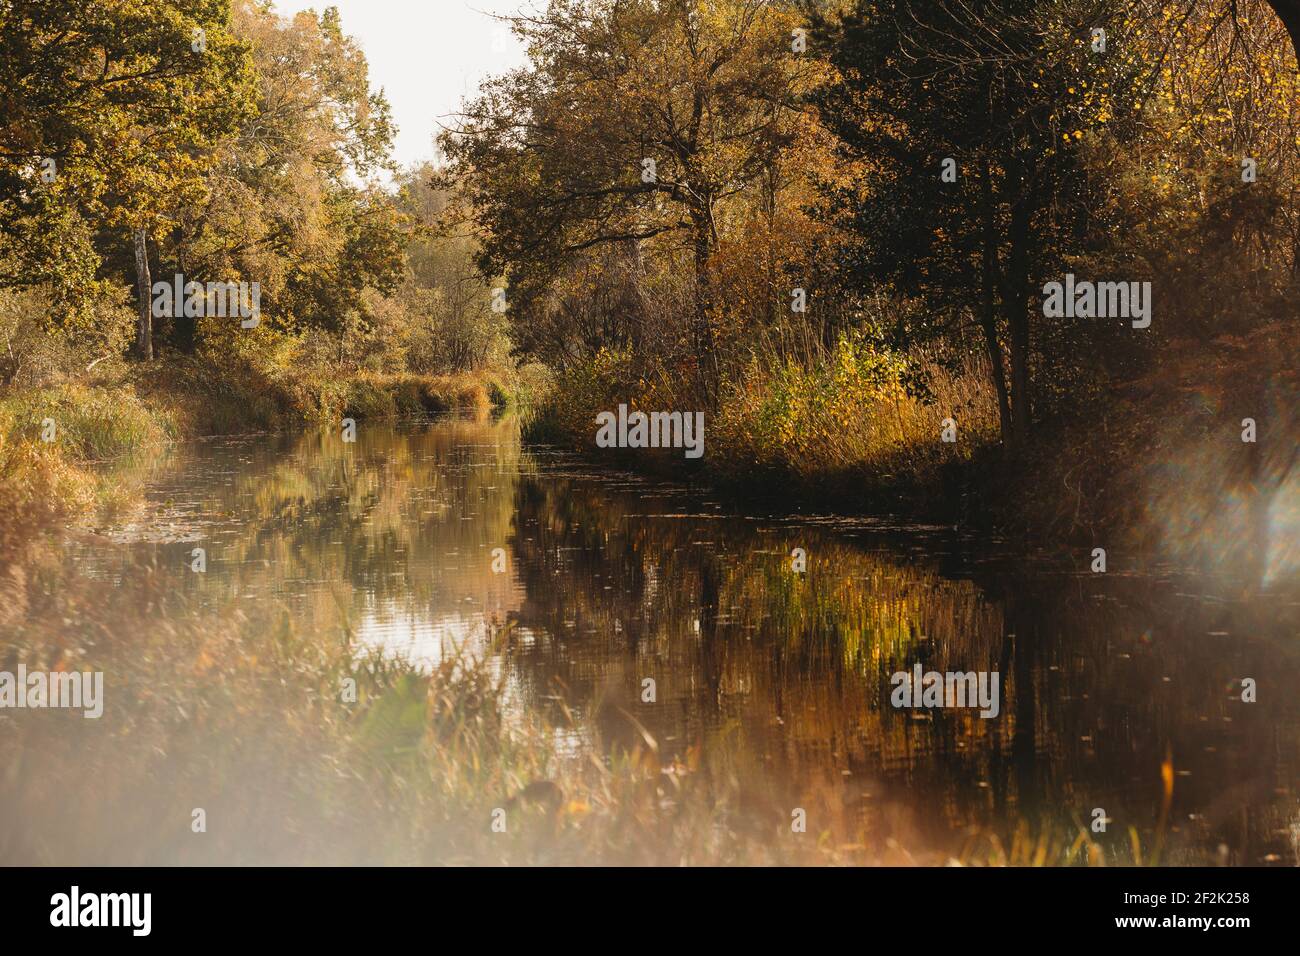 Landscape view of canal in fall with reflections and light flare Stock Photo